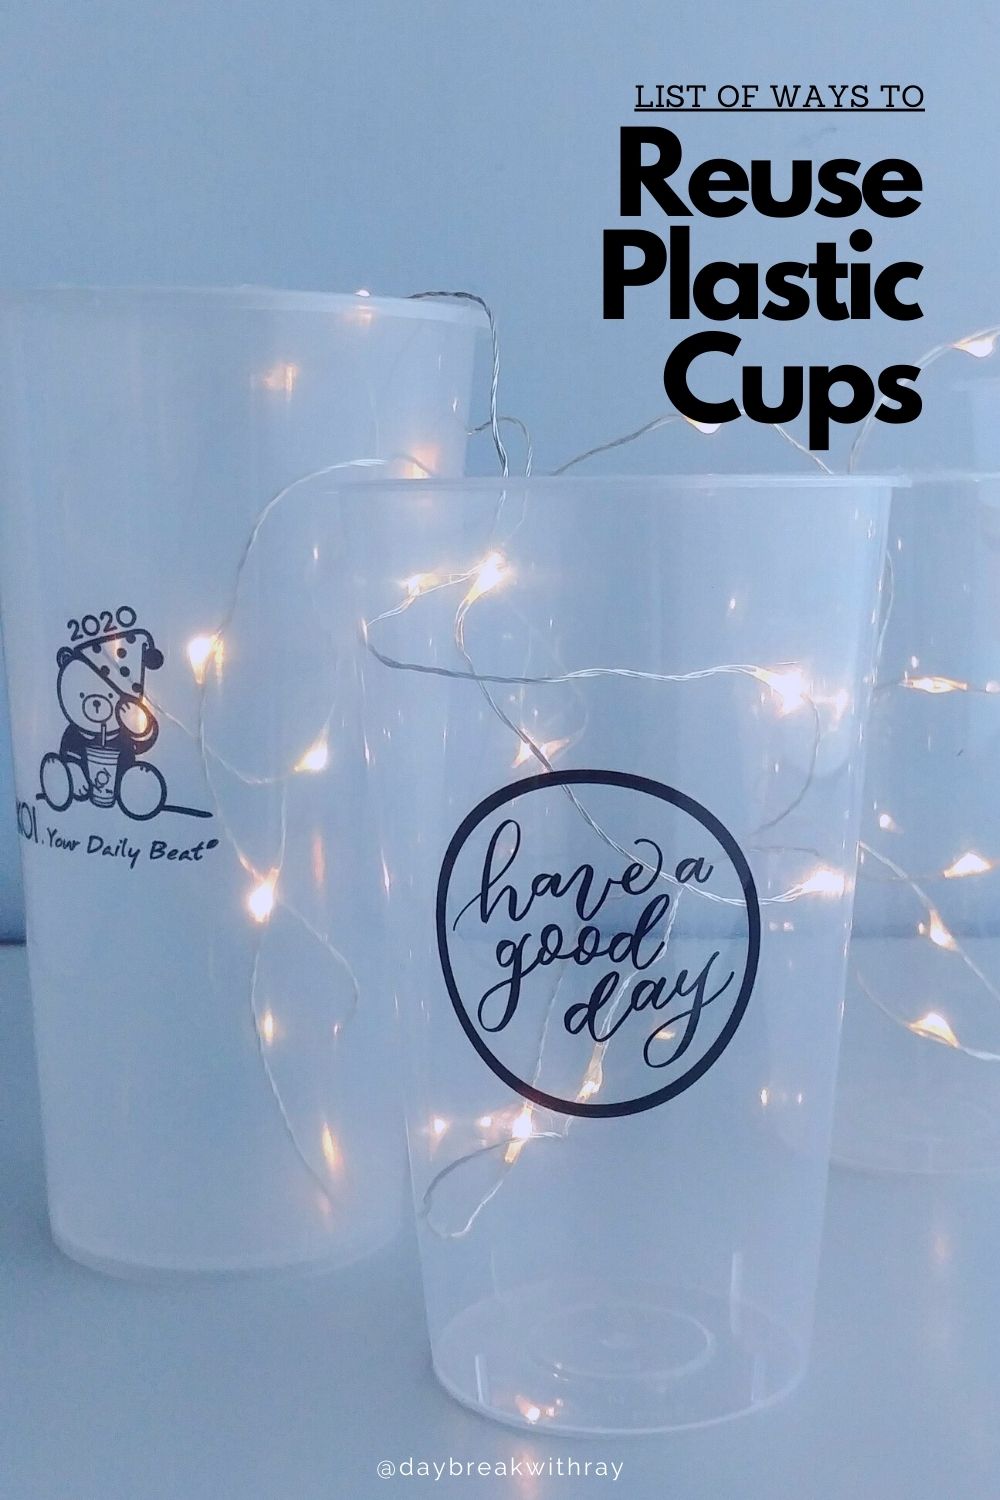 Ways to Reuse Plastic Cups from Bubble Tea